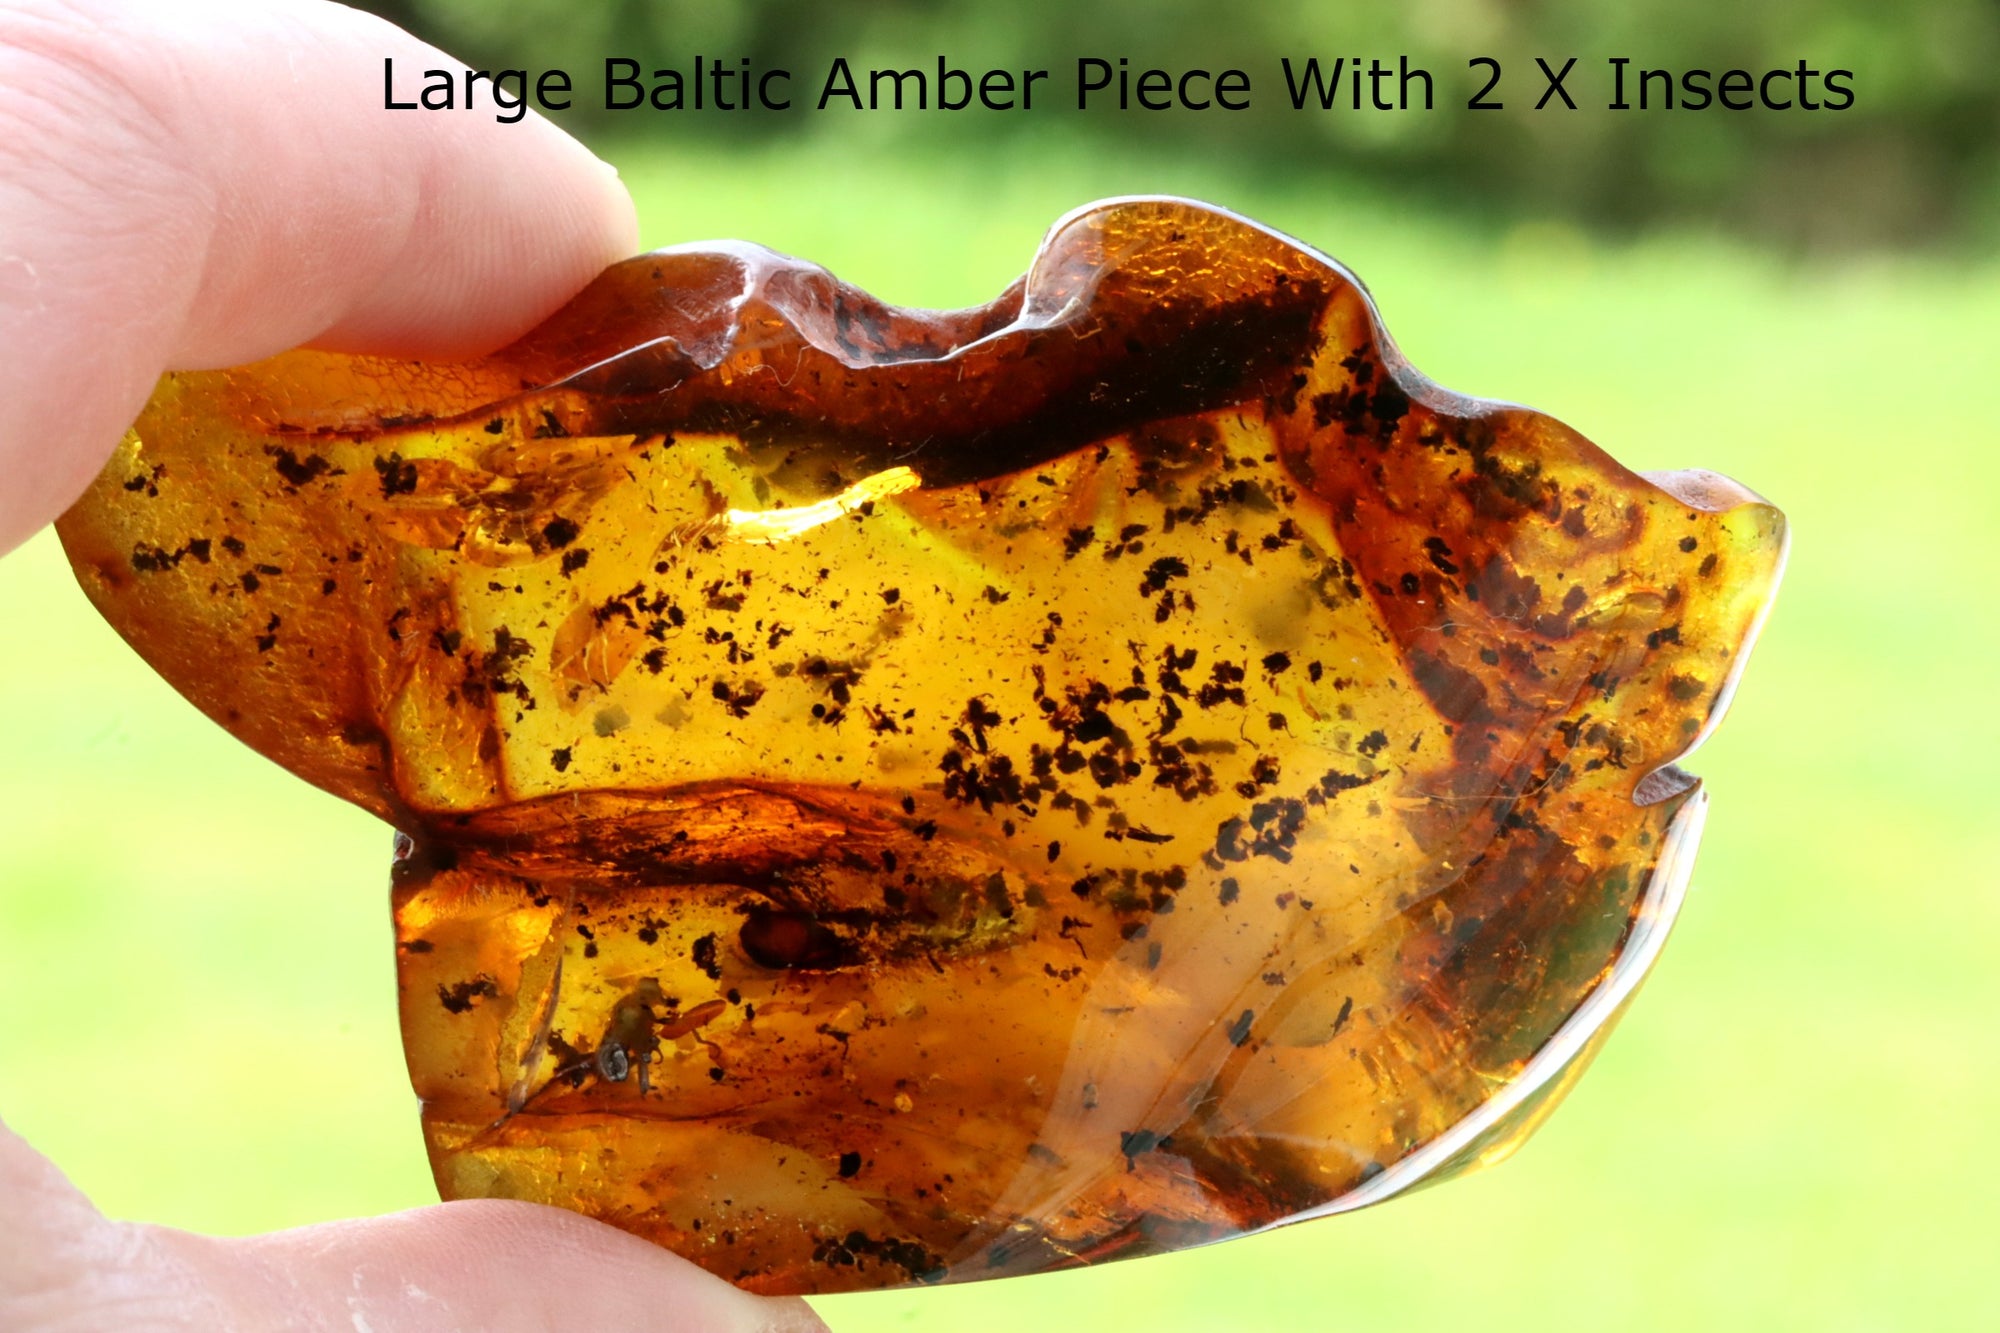 Baltic Amber Museum Collector's gem With 2 X Insects Inclusion in This Piece